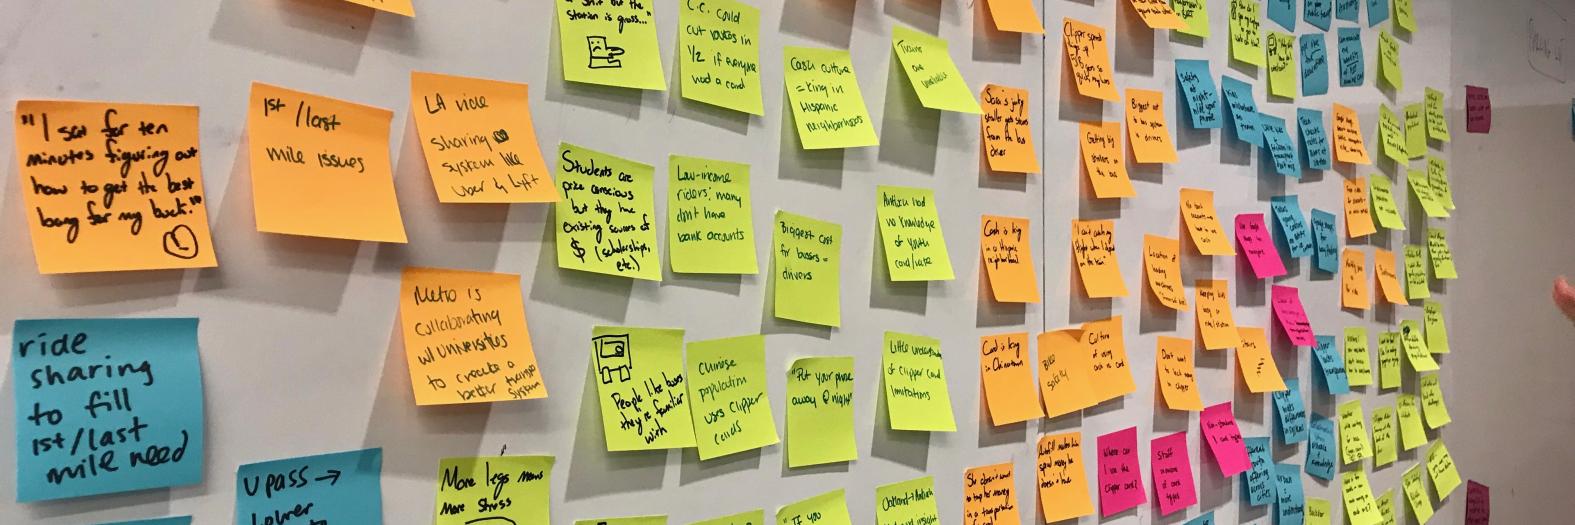 post-its from event